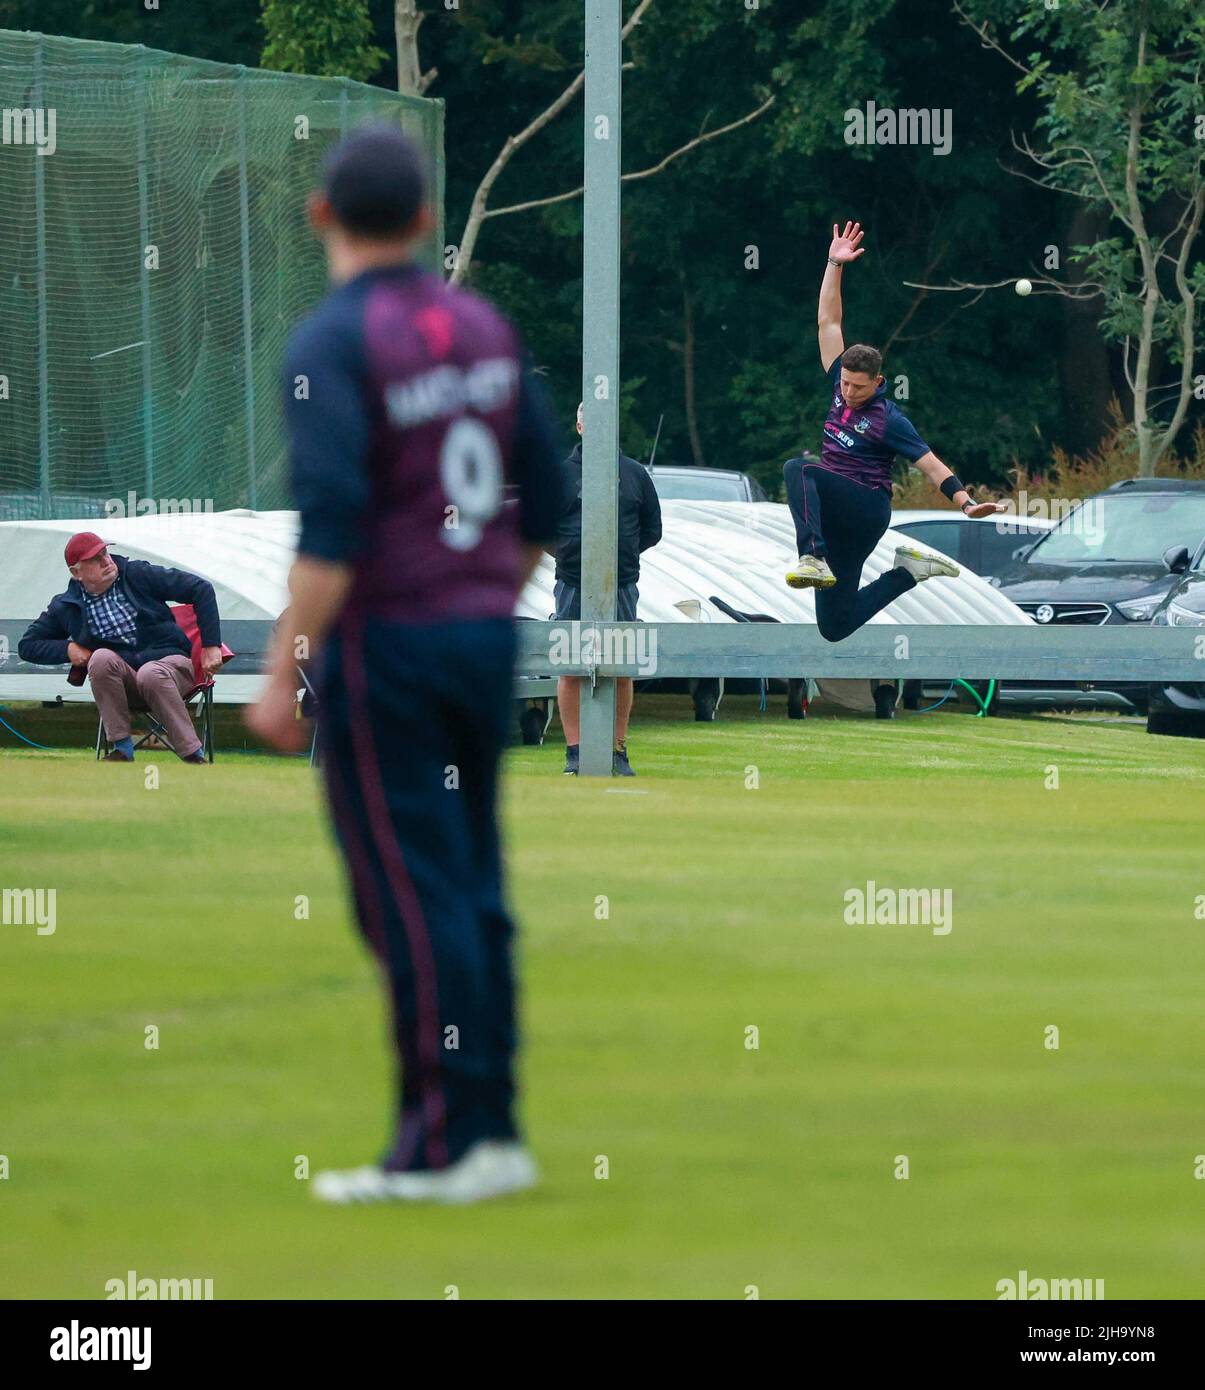 The Lawn, Waringstown, Northern Ireland, UK. 16 Jul 2022. The Lagan Valley Steels Twenty 20 Cup Final 2022. CIYMS v CSNI – CIYMS won by 16 runs (DLS) in a rain-affected match. Six runs for CSNI ans this CIYMS fielder was unable to get a hand on a fierce drive. Credit: David Hunter/Alamy Live News. Stock Photo